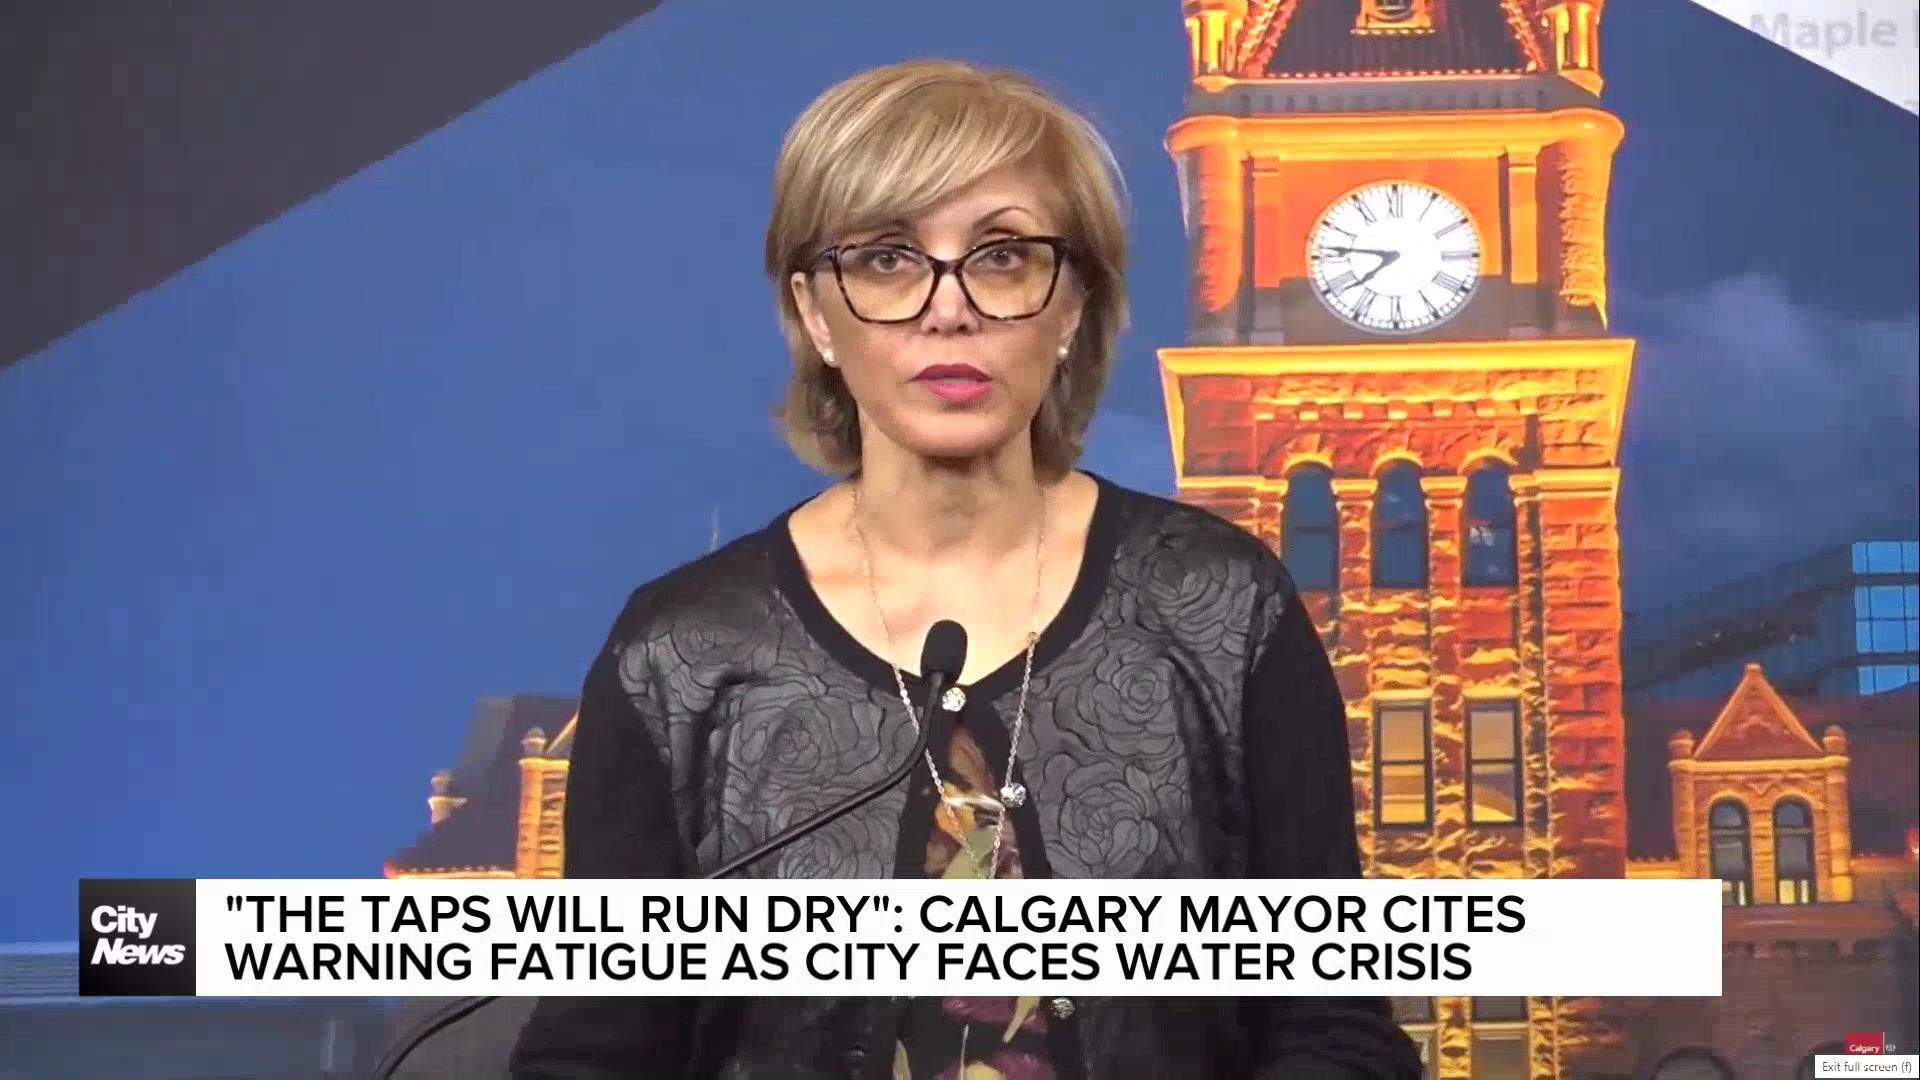 "The taps will run dry": Calgary mayor cites 'warning fatigue' as city faces water crisis